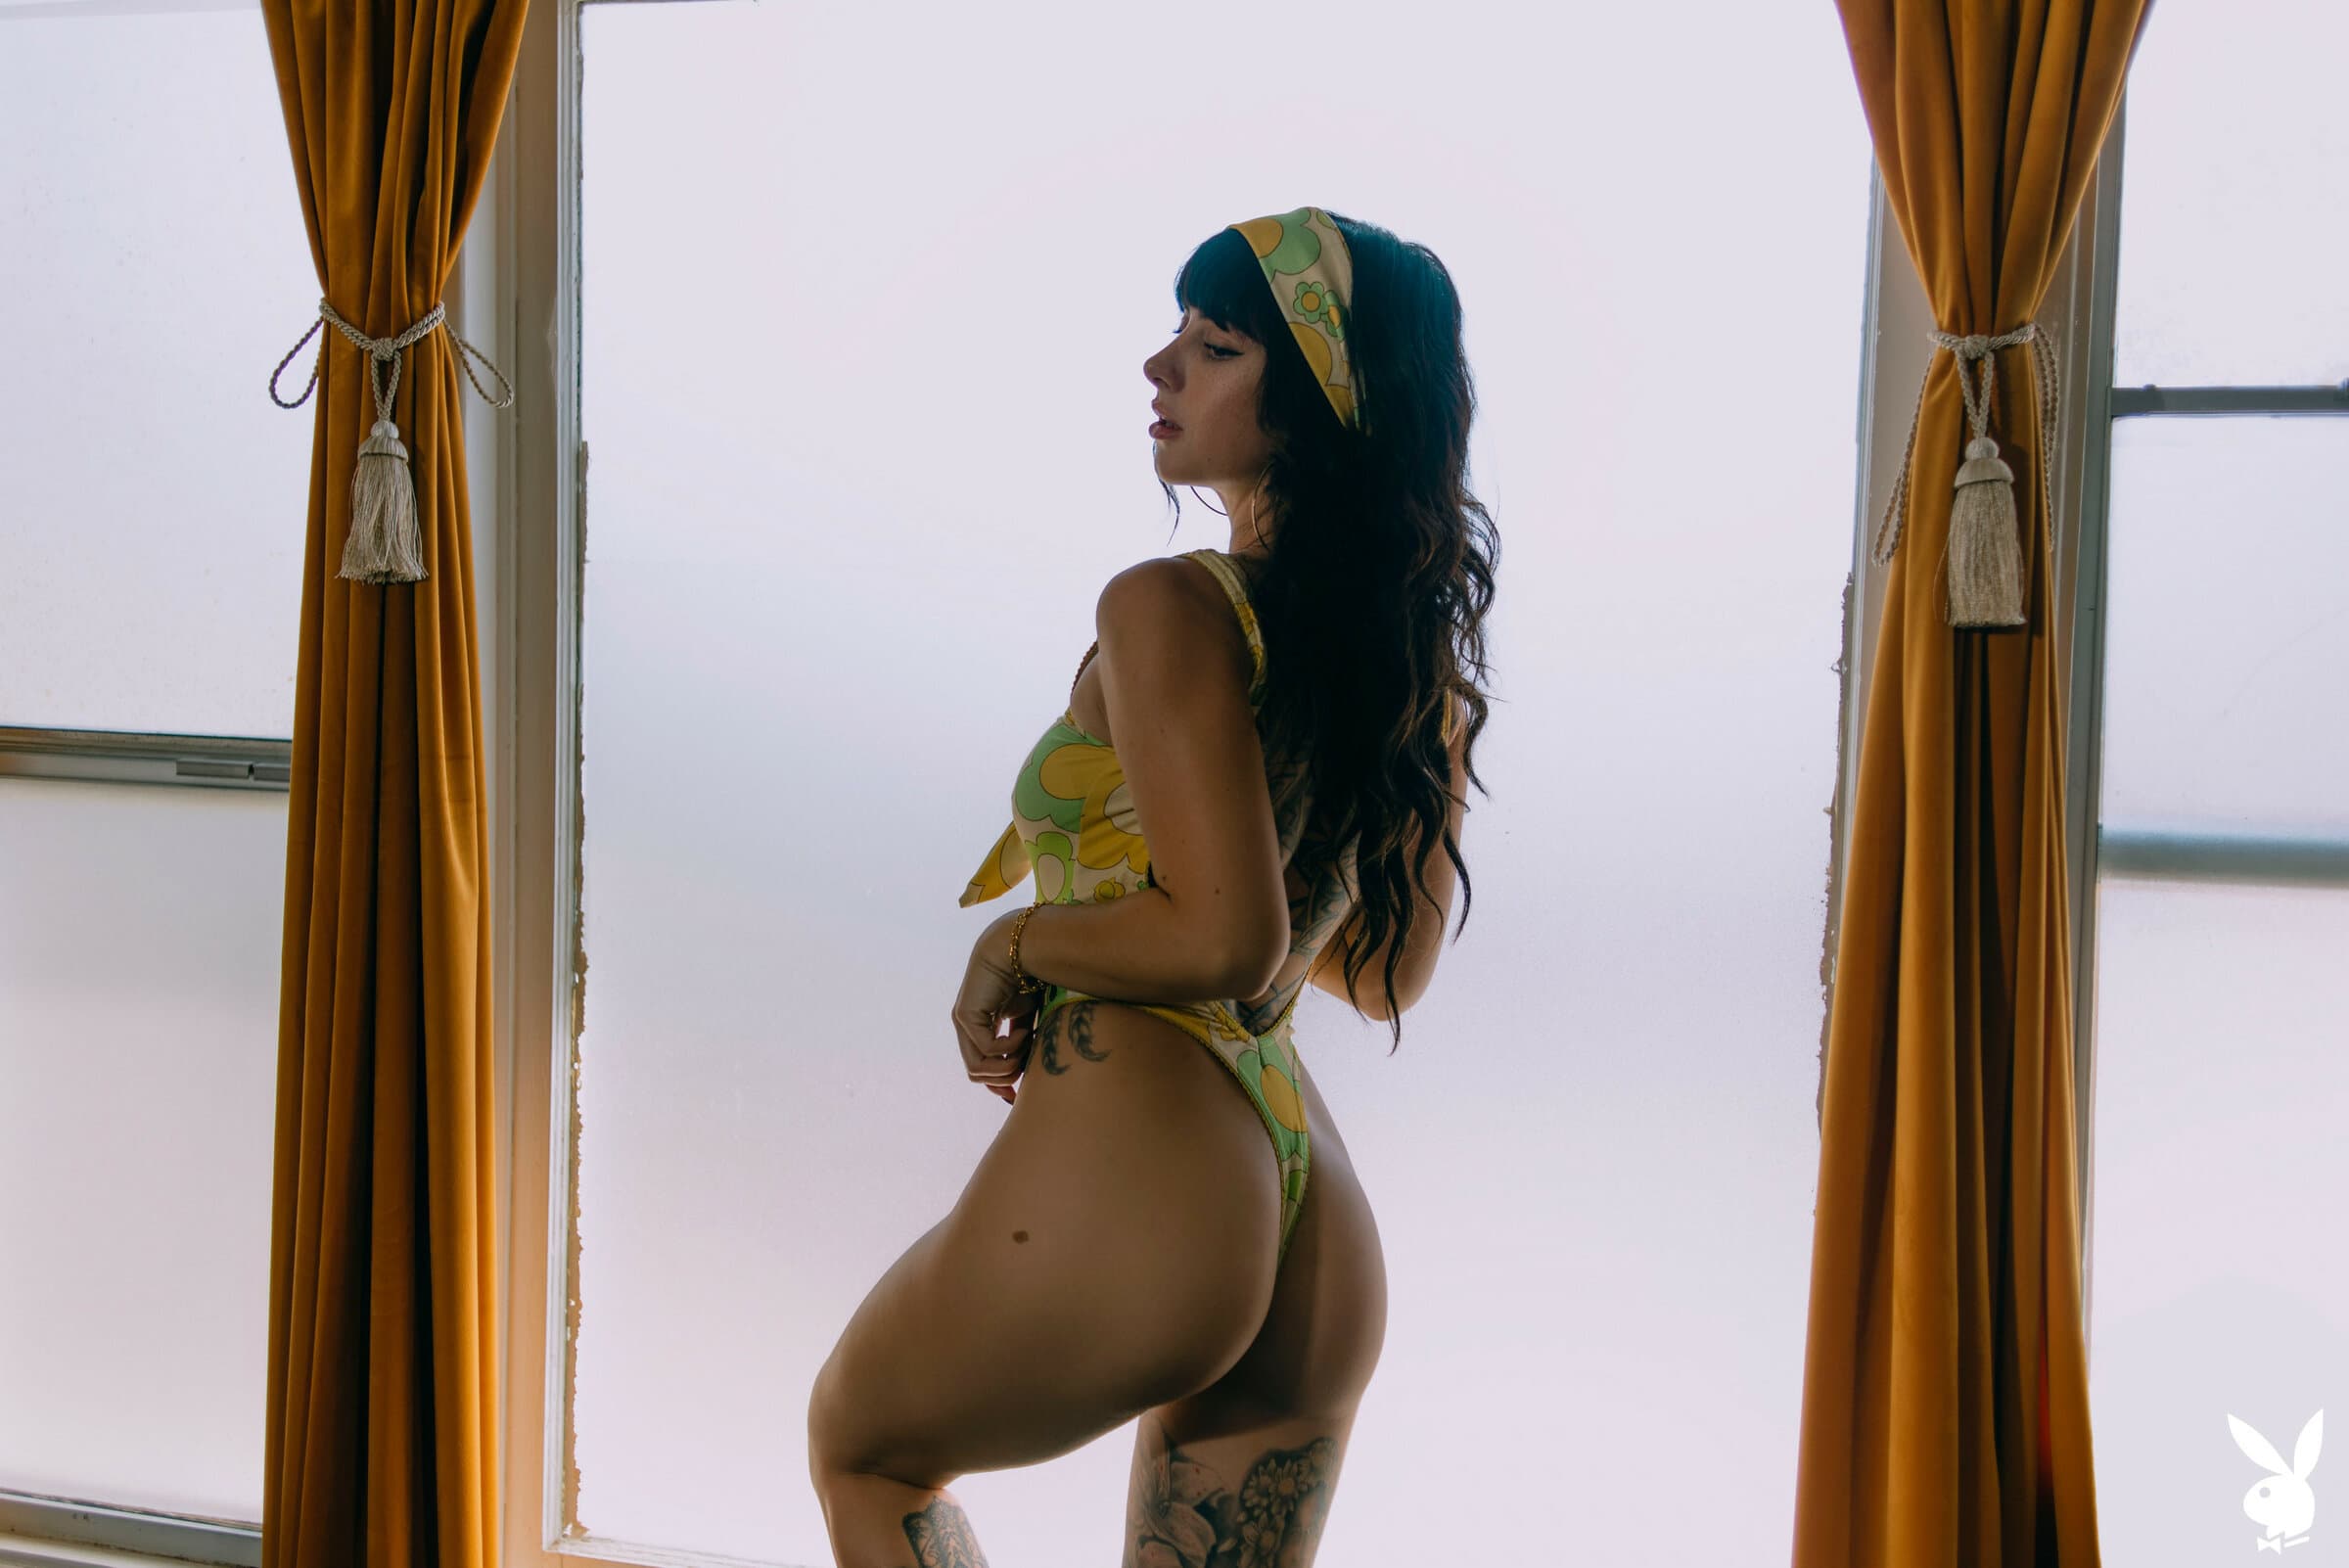 Reed Suicide gallery image 3 of 15